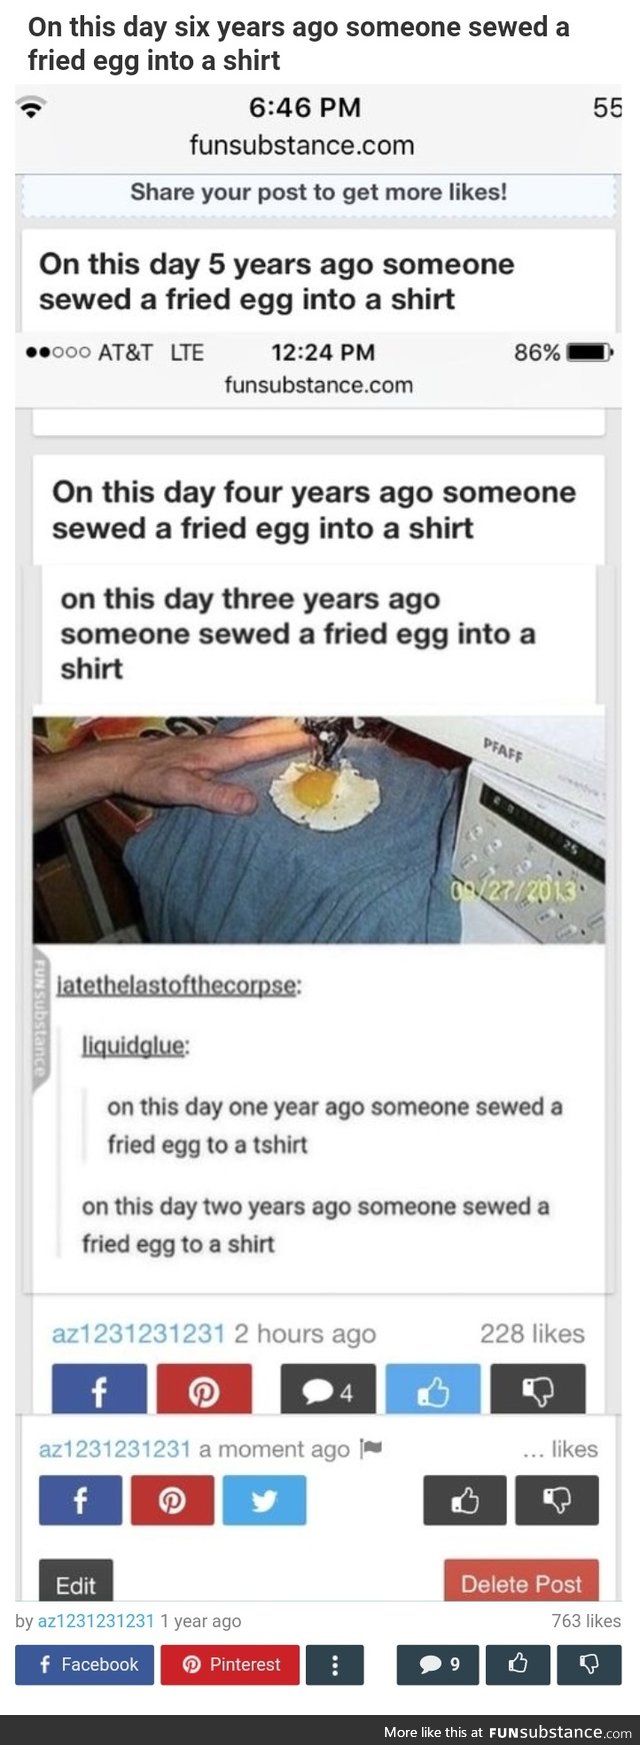 On this day eight years ago someone sewed a fried egg into a shirt